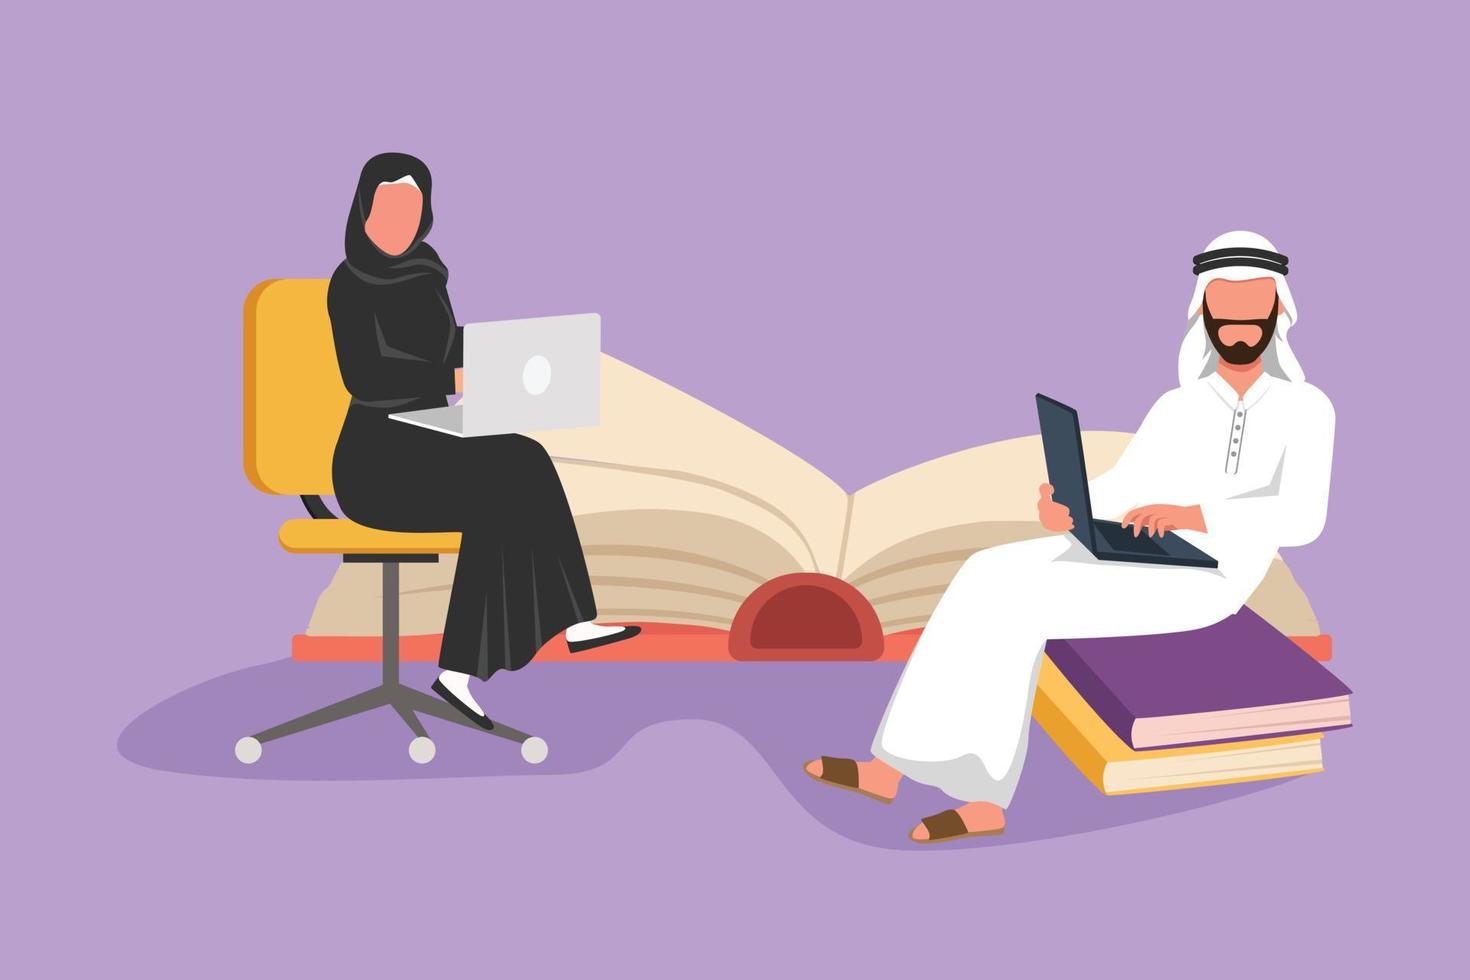 Graphic flat design drawing group of people with laptop computer at home. Arabian man sitting on pile of books, woman sitting on chair, typing or studying together. Cartoon style vector illustration